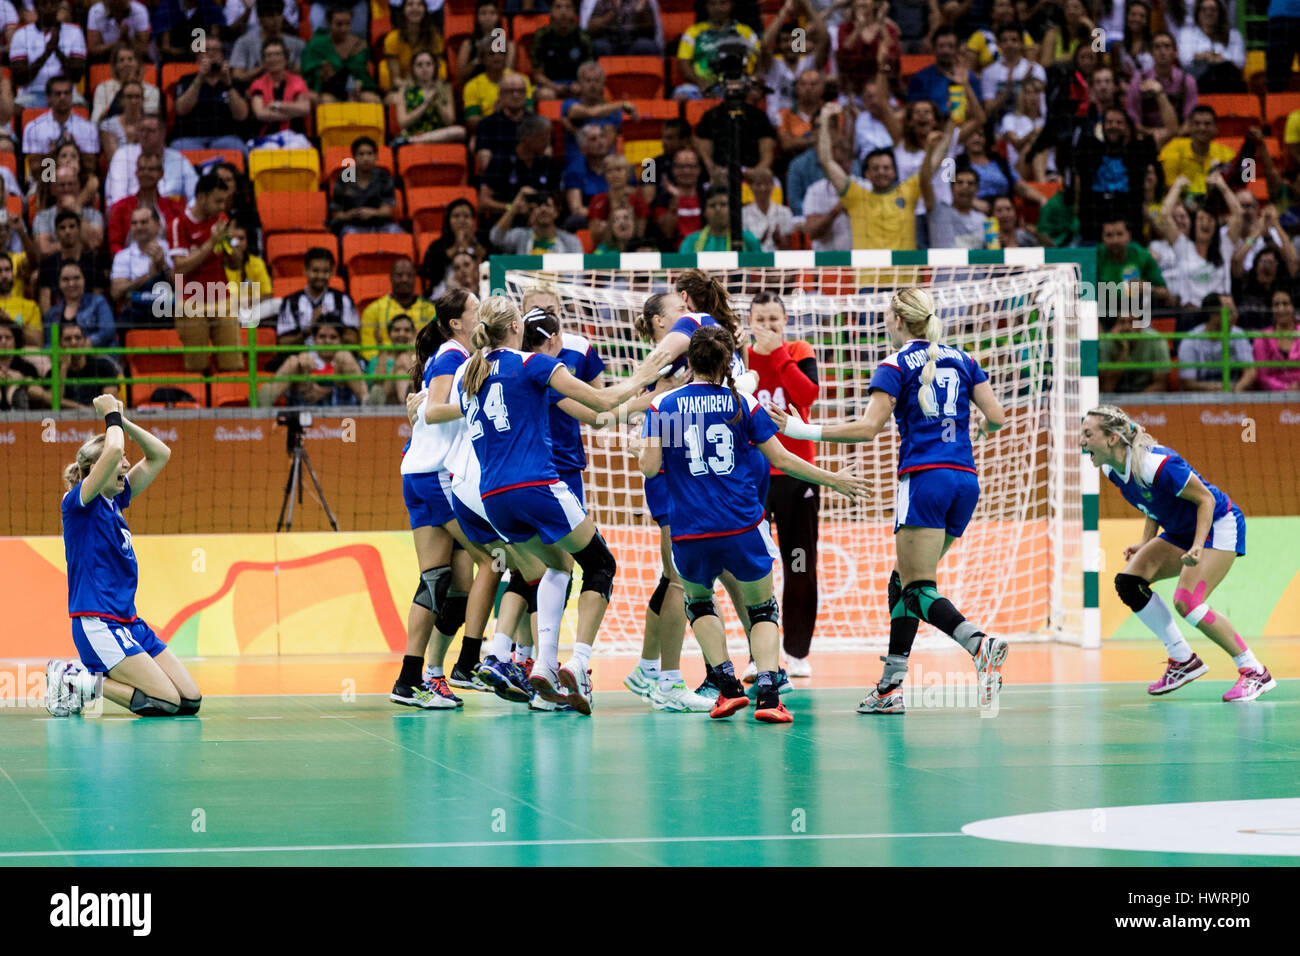 Rio de Janeiro, Brazil. 20 August 2016  The Russian women's handball celebrates it's victory in the gold medal match  vs. France at the 2016 Olympics Stock Photo